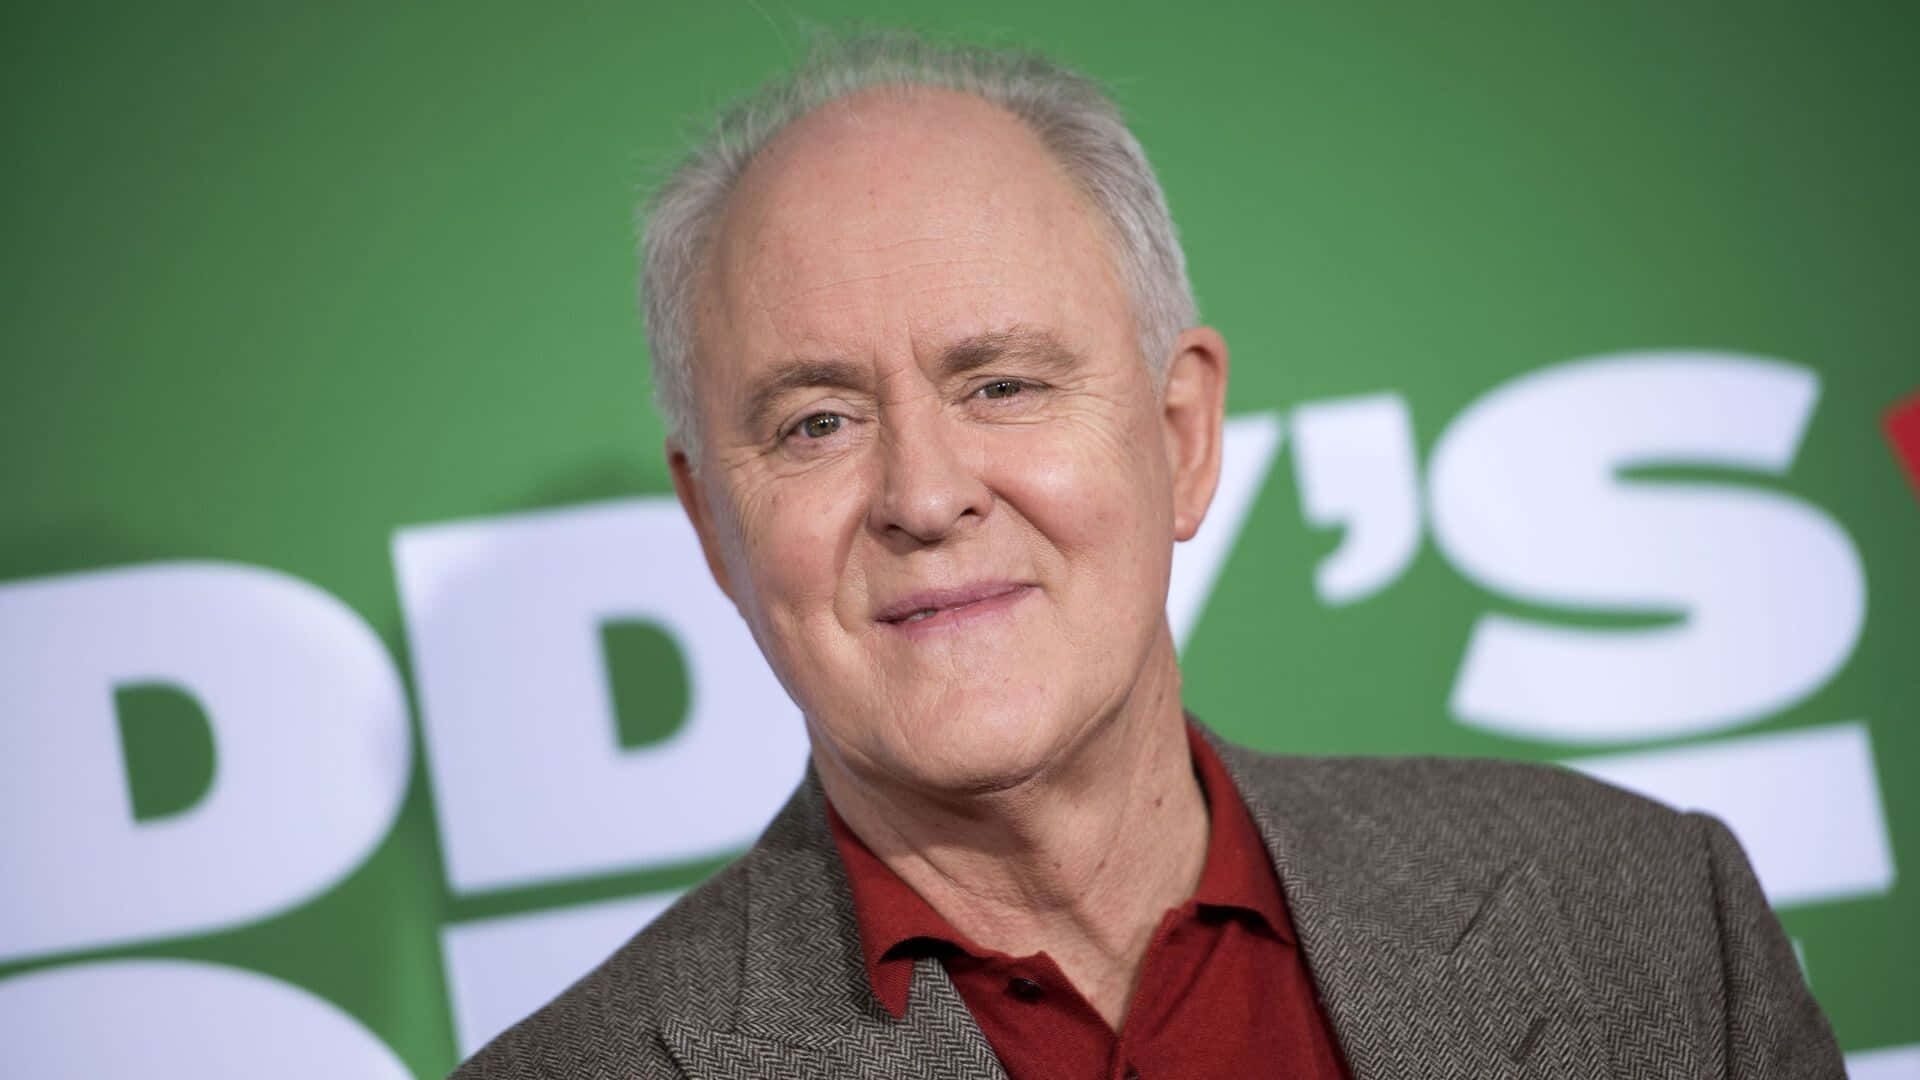 The prolific actor John Lithgow in a thoughtful pose Wallpaper